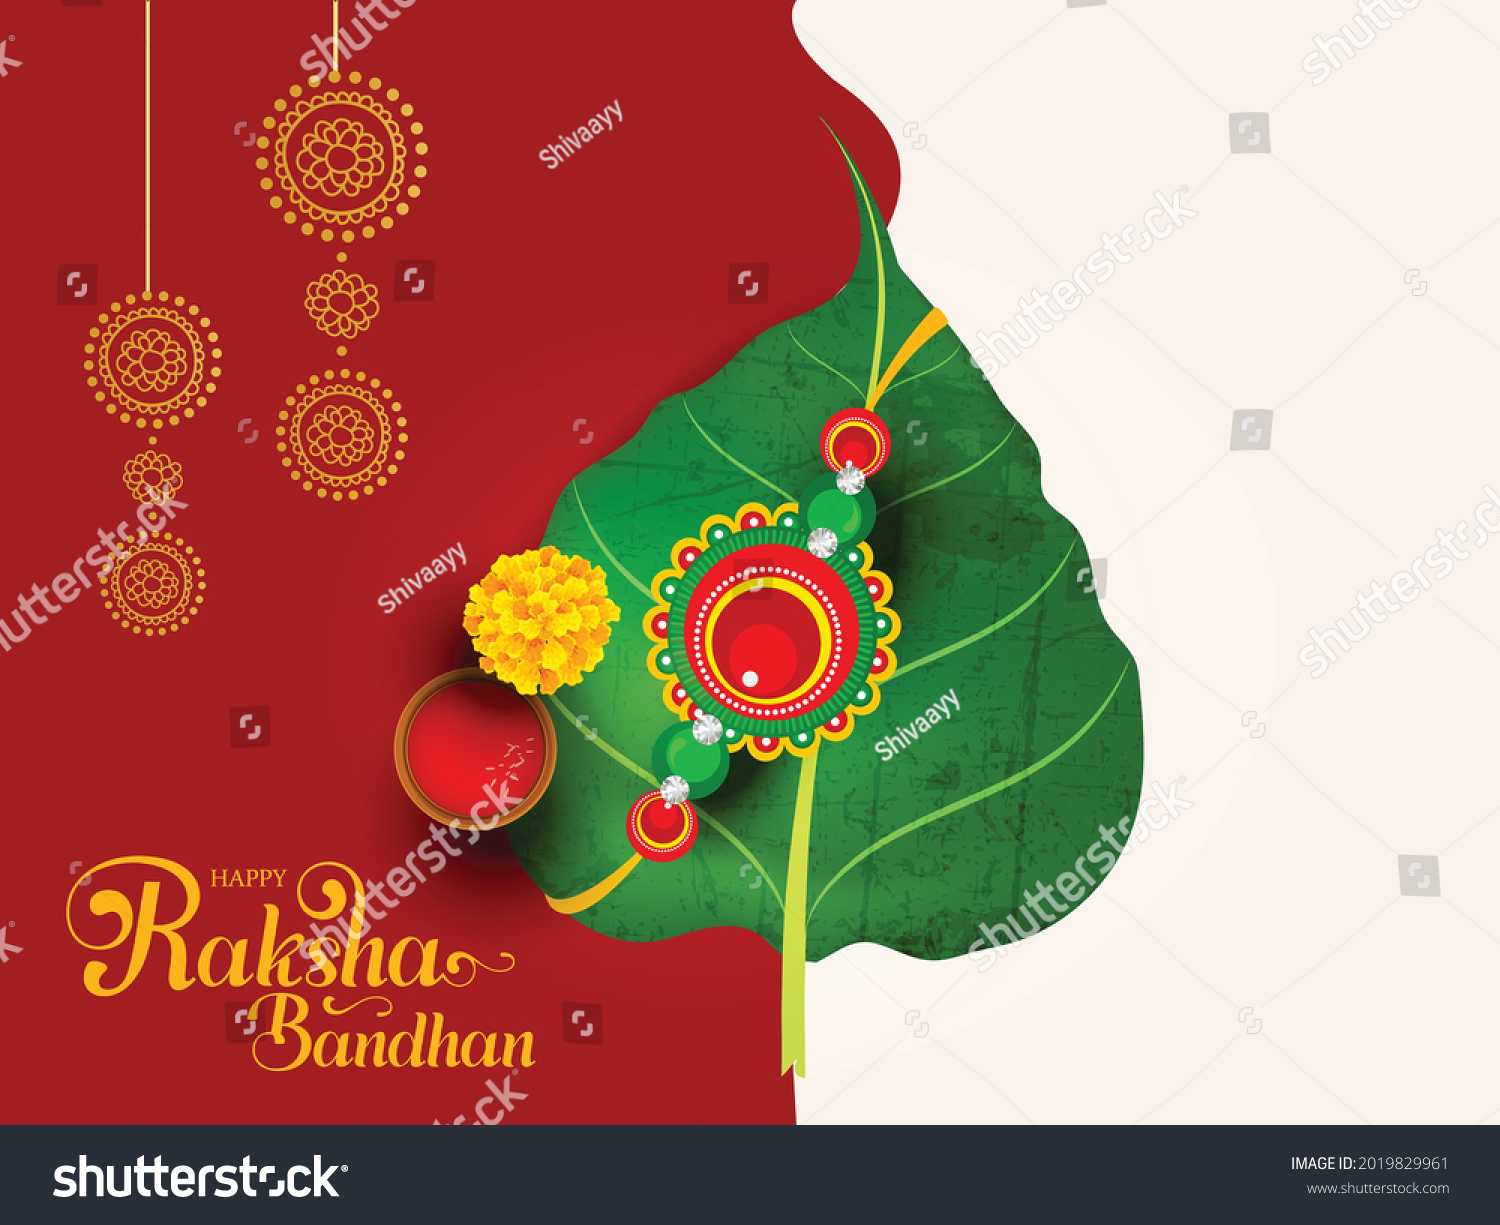 SVG of Beautiful Rakhi Traditional Background Design with Creative Text 